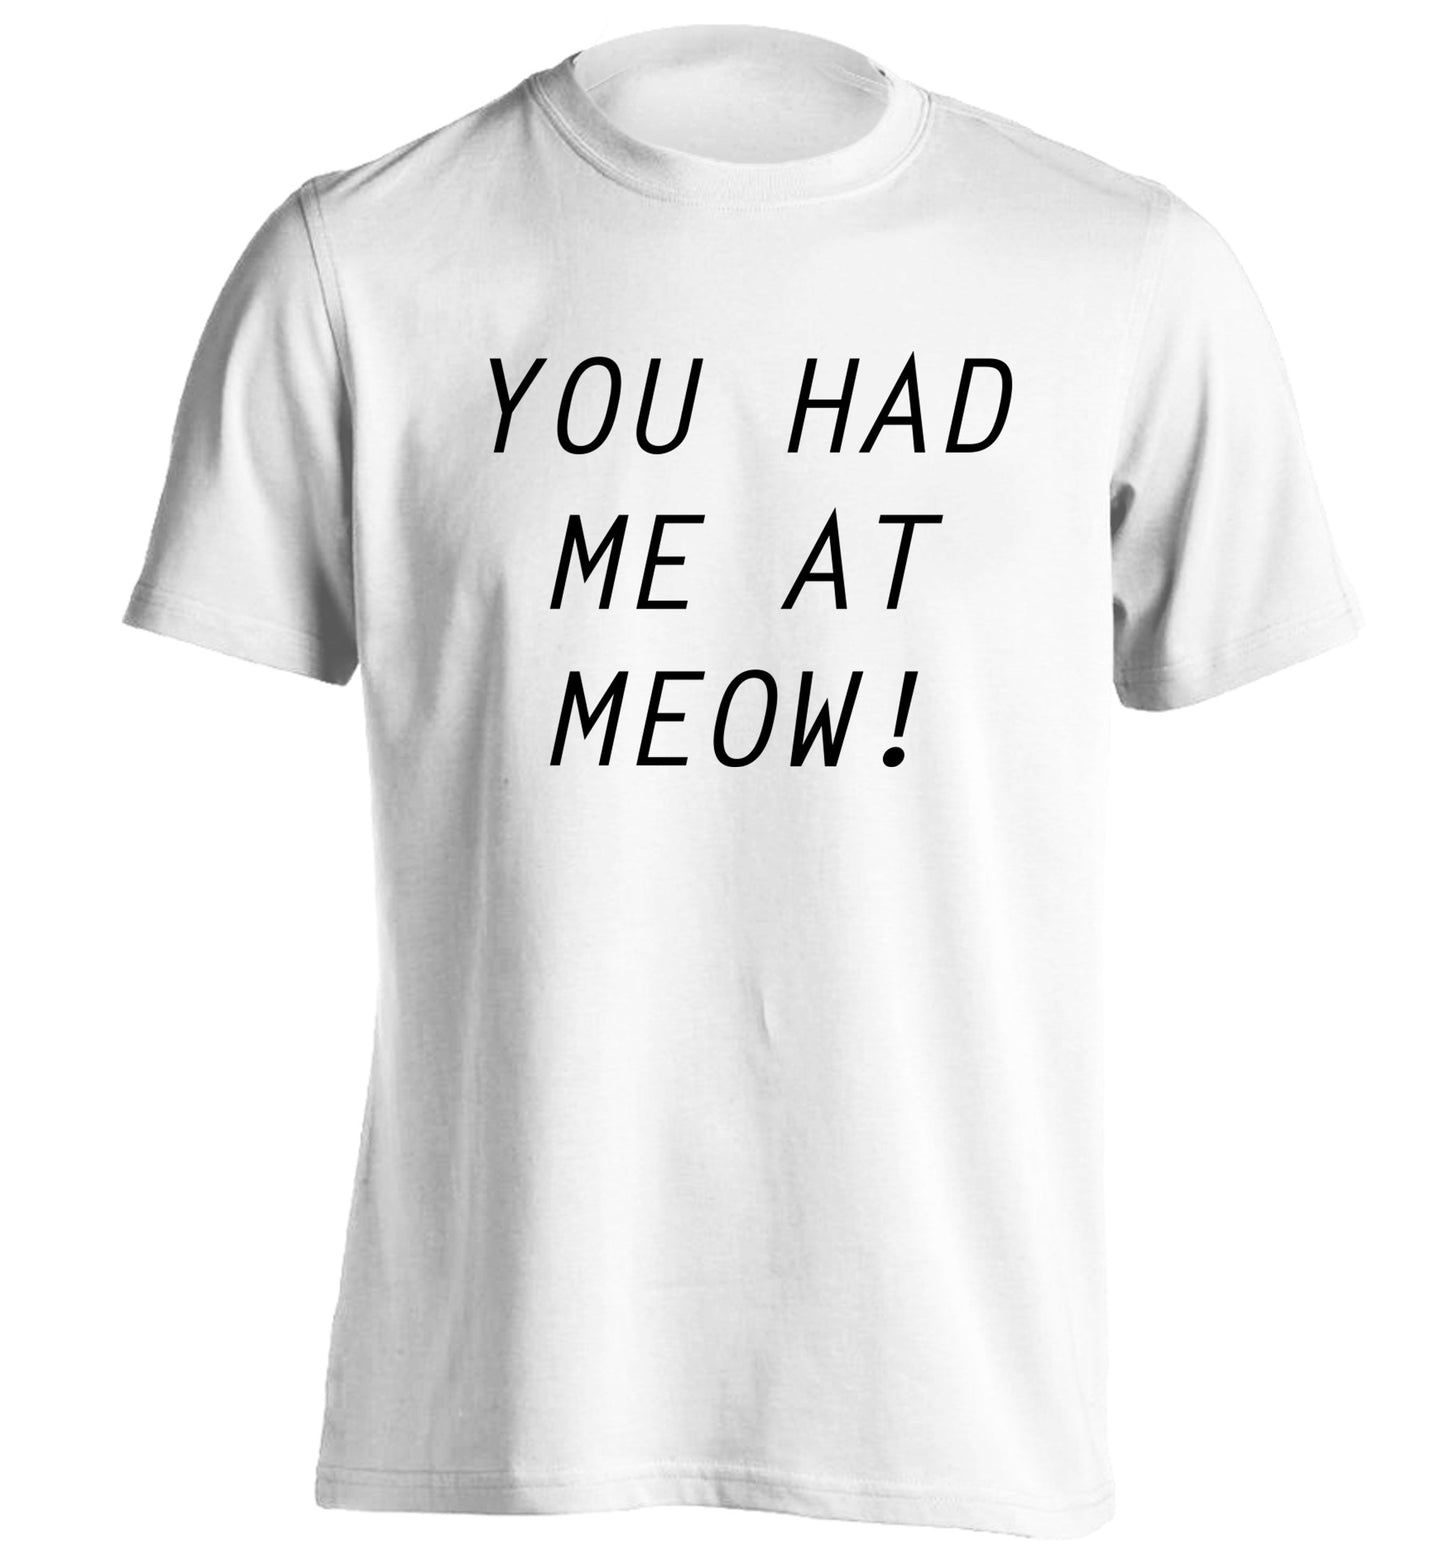 You had me at meow adults unisex white Tshirt 2XL